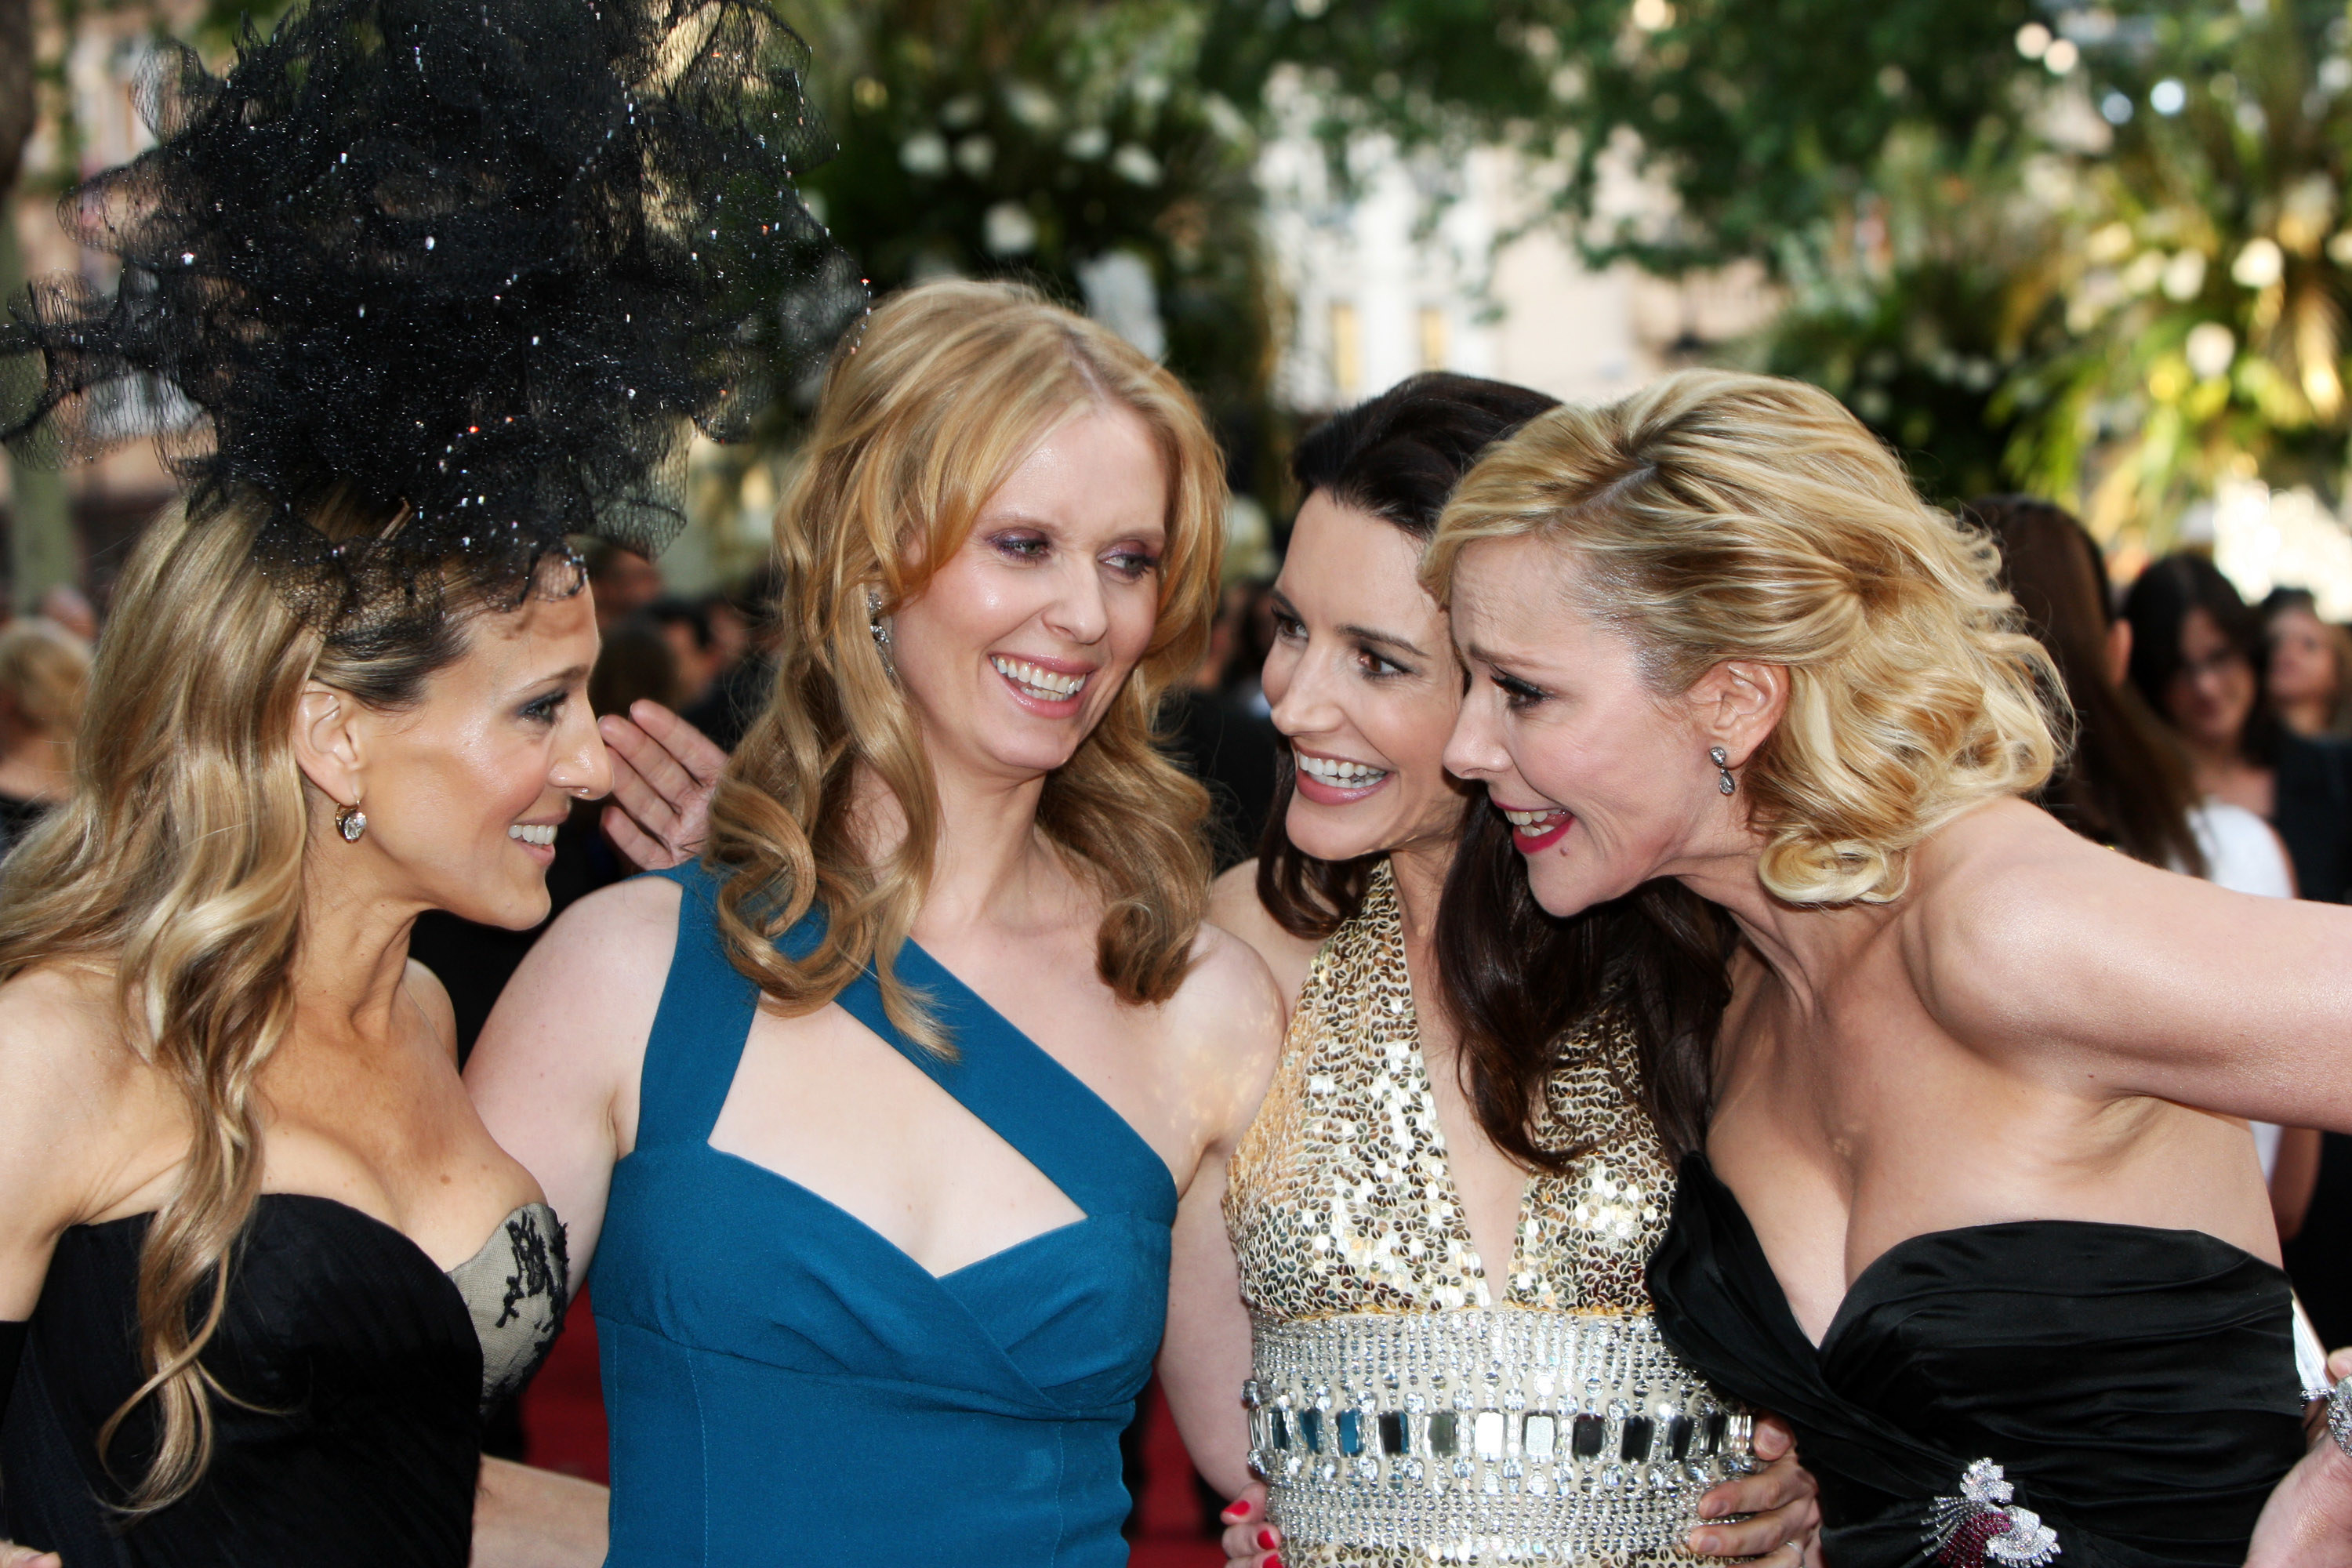 The four SATC leads smiling together